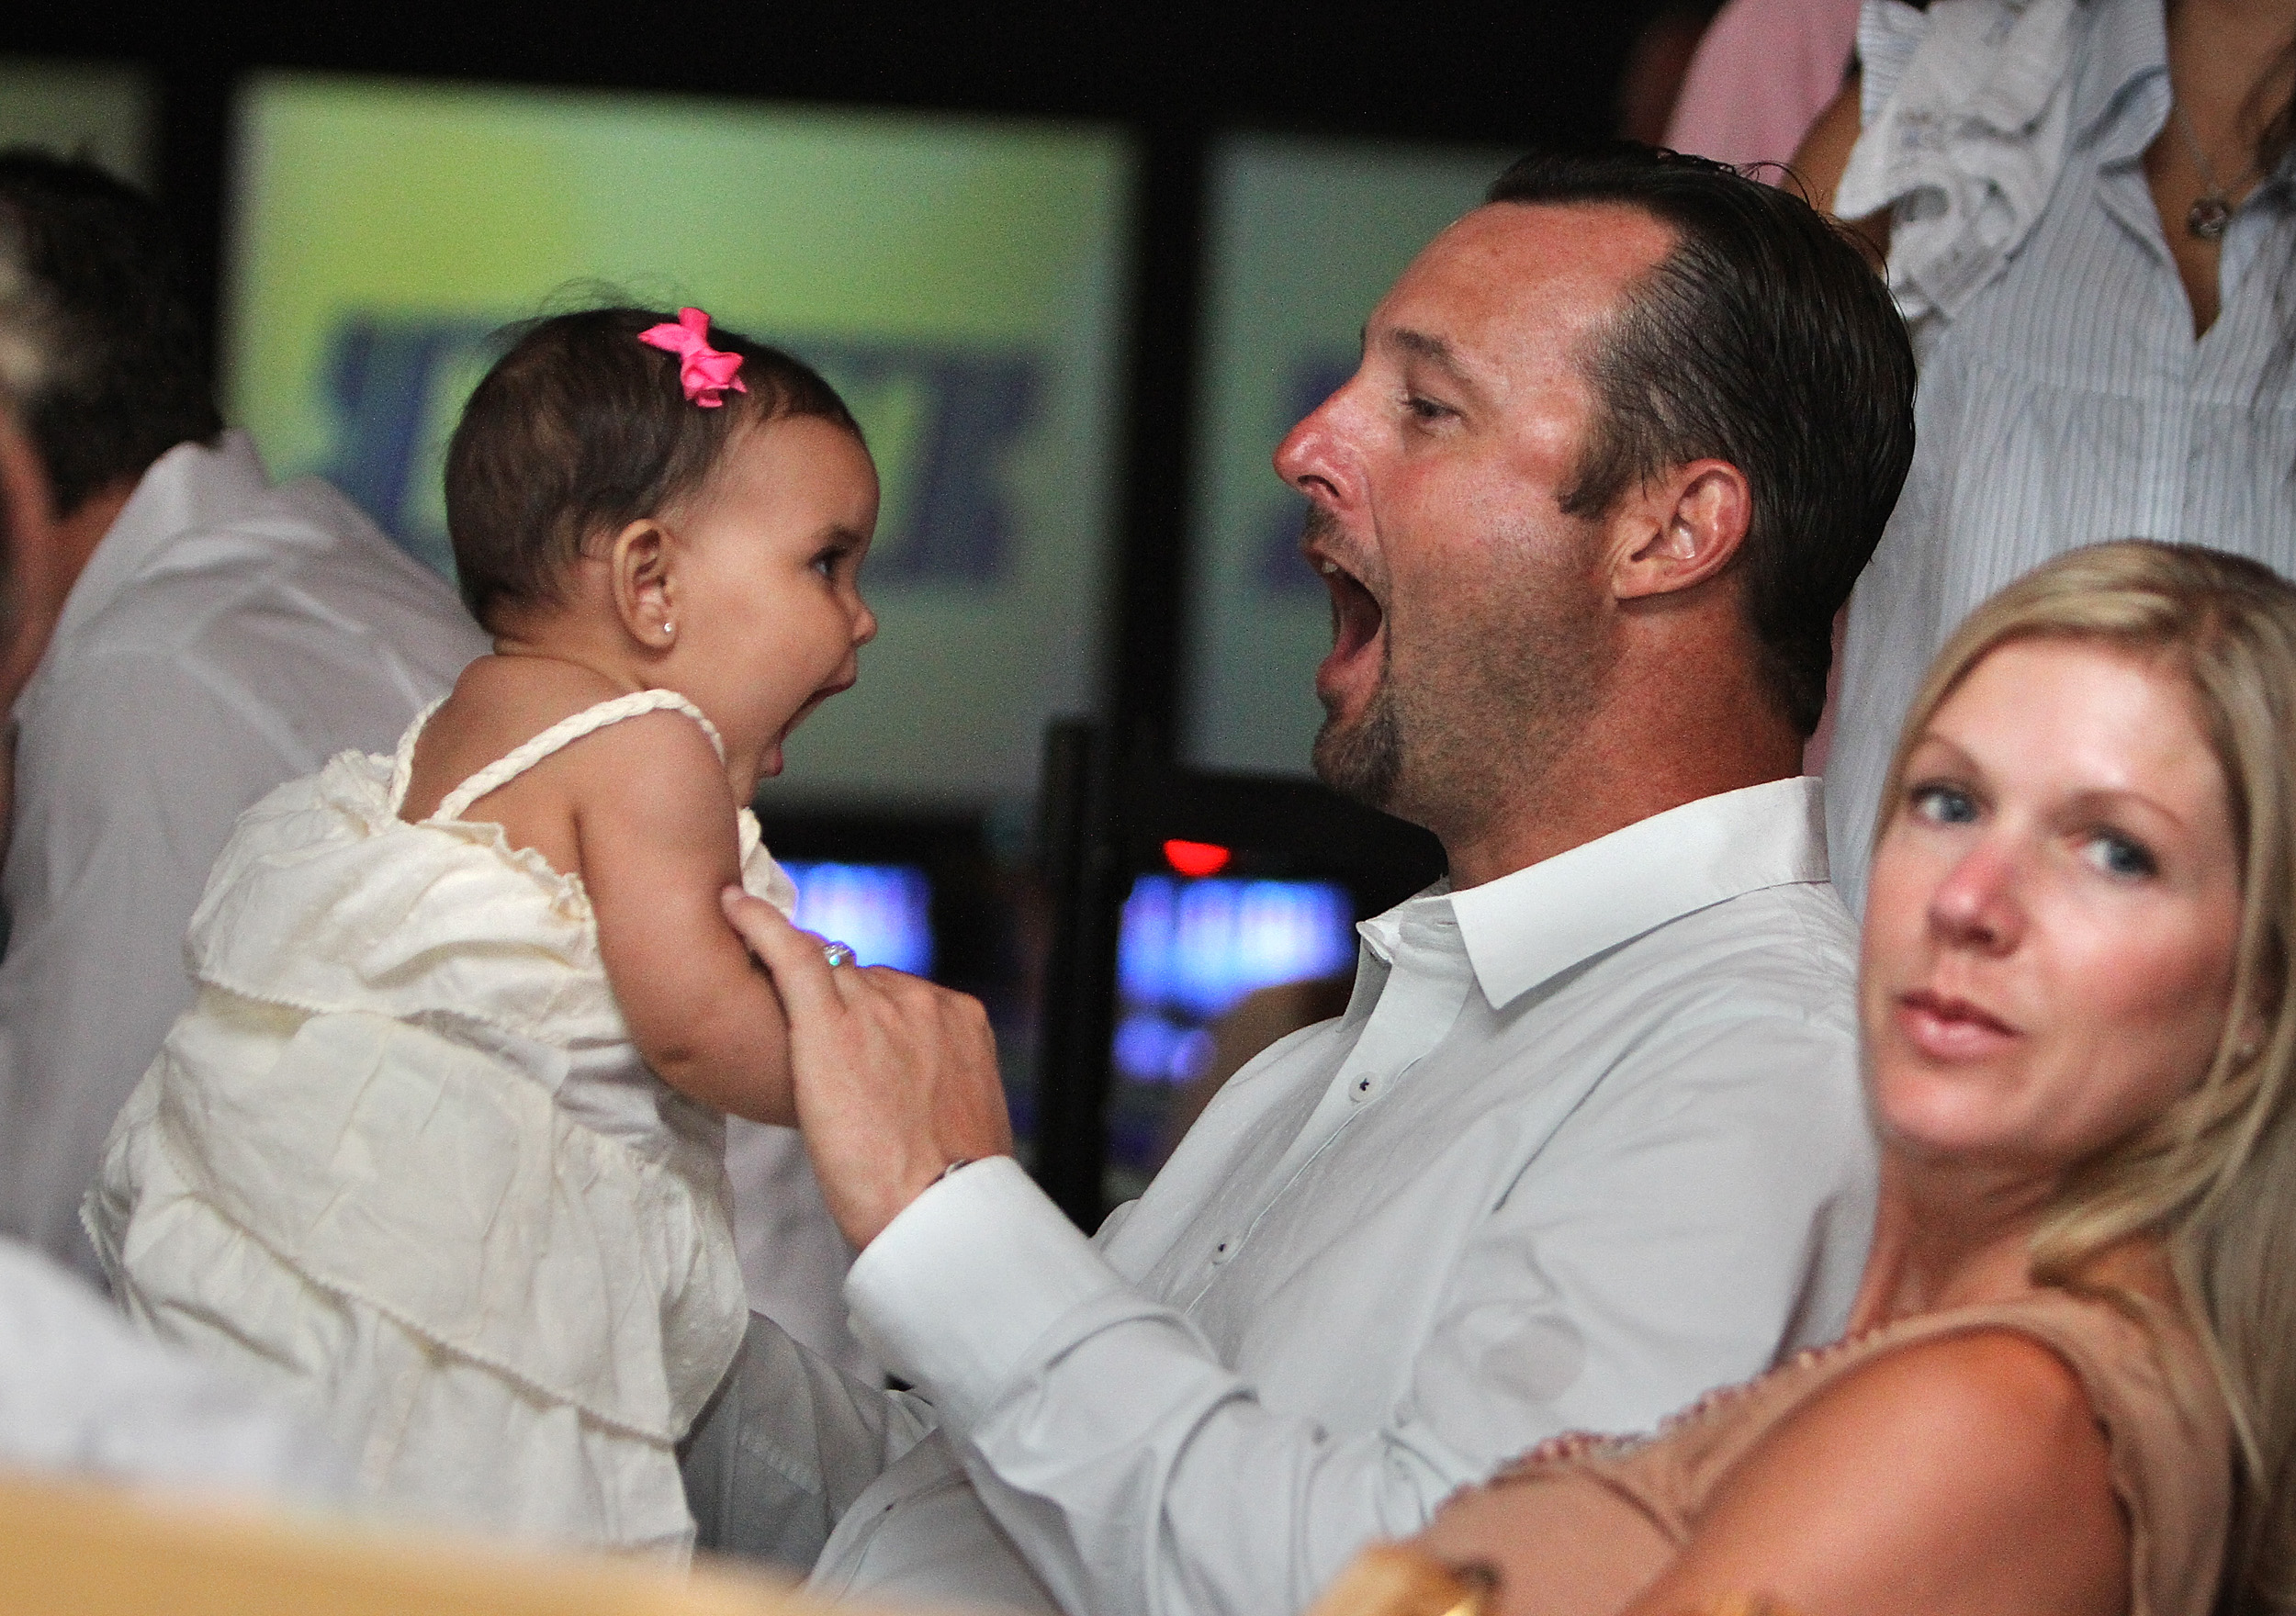 Tim and Stacy Wakefield with Manny Delcarmen's daughter Miley at Manny's Bowling Strikes for Schools event in Boston, Massachusetts on June 28, 2010 | Source: Getty Images